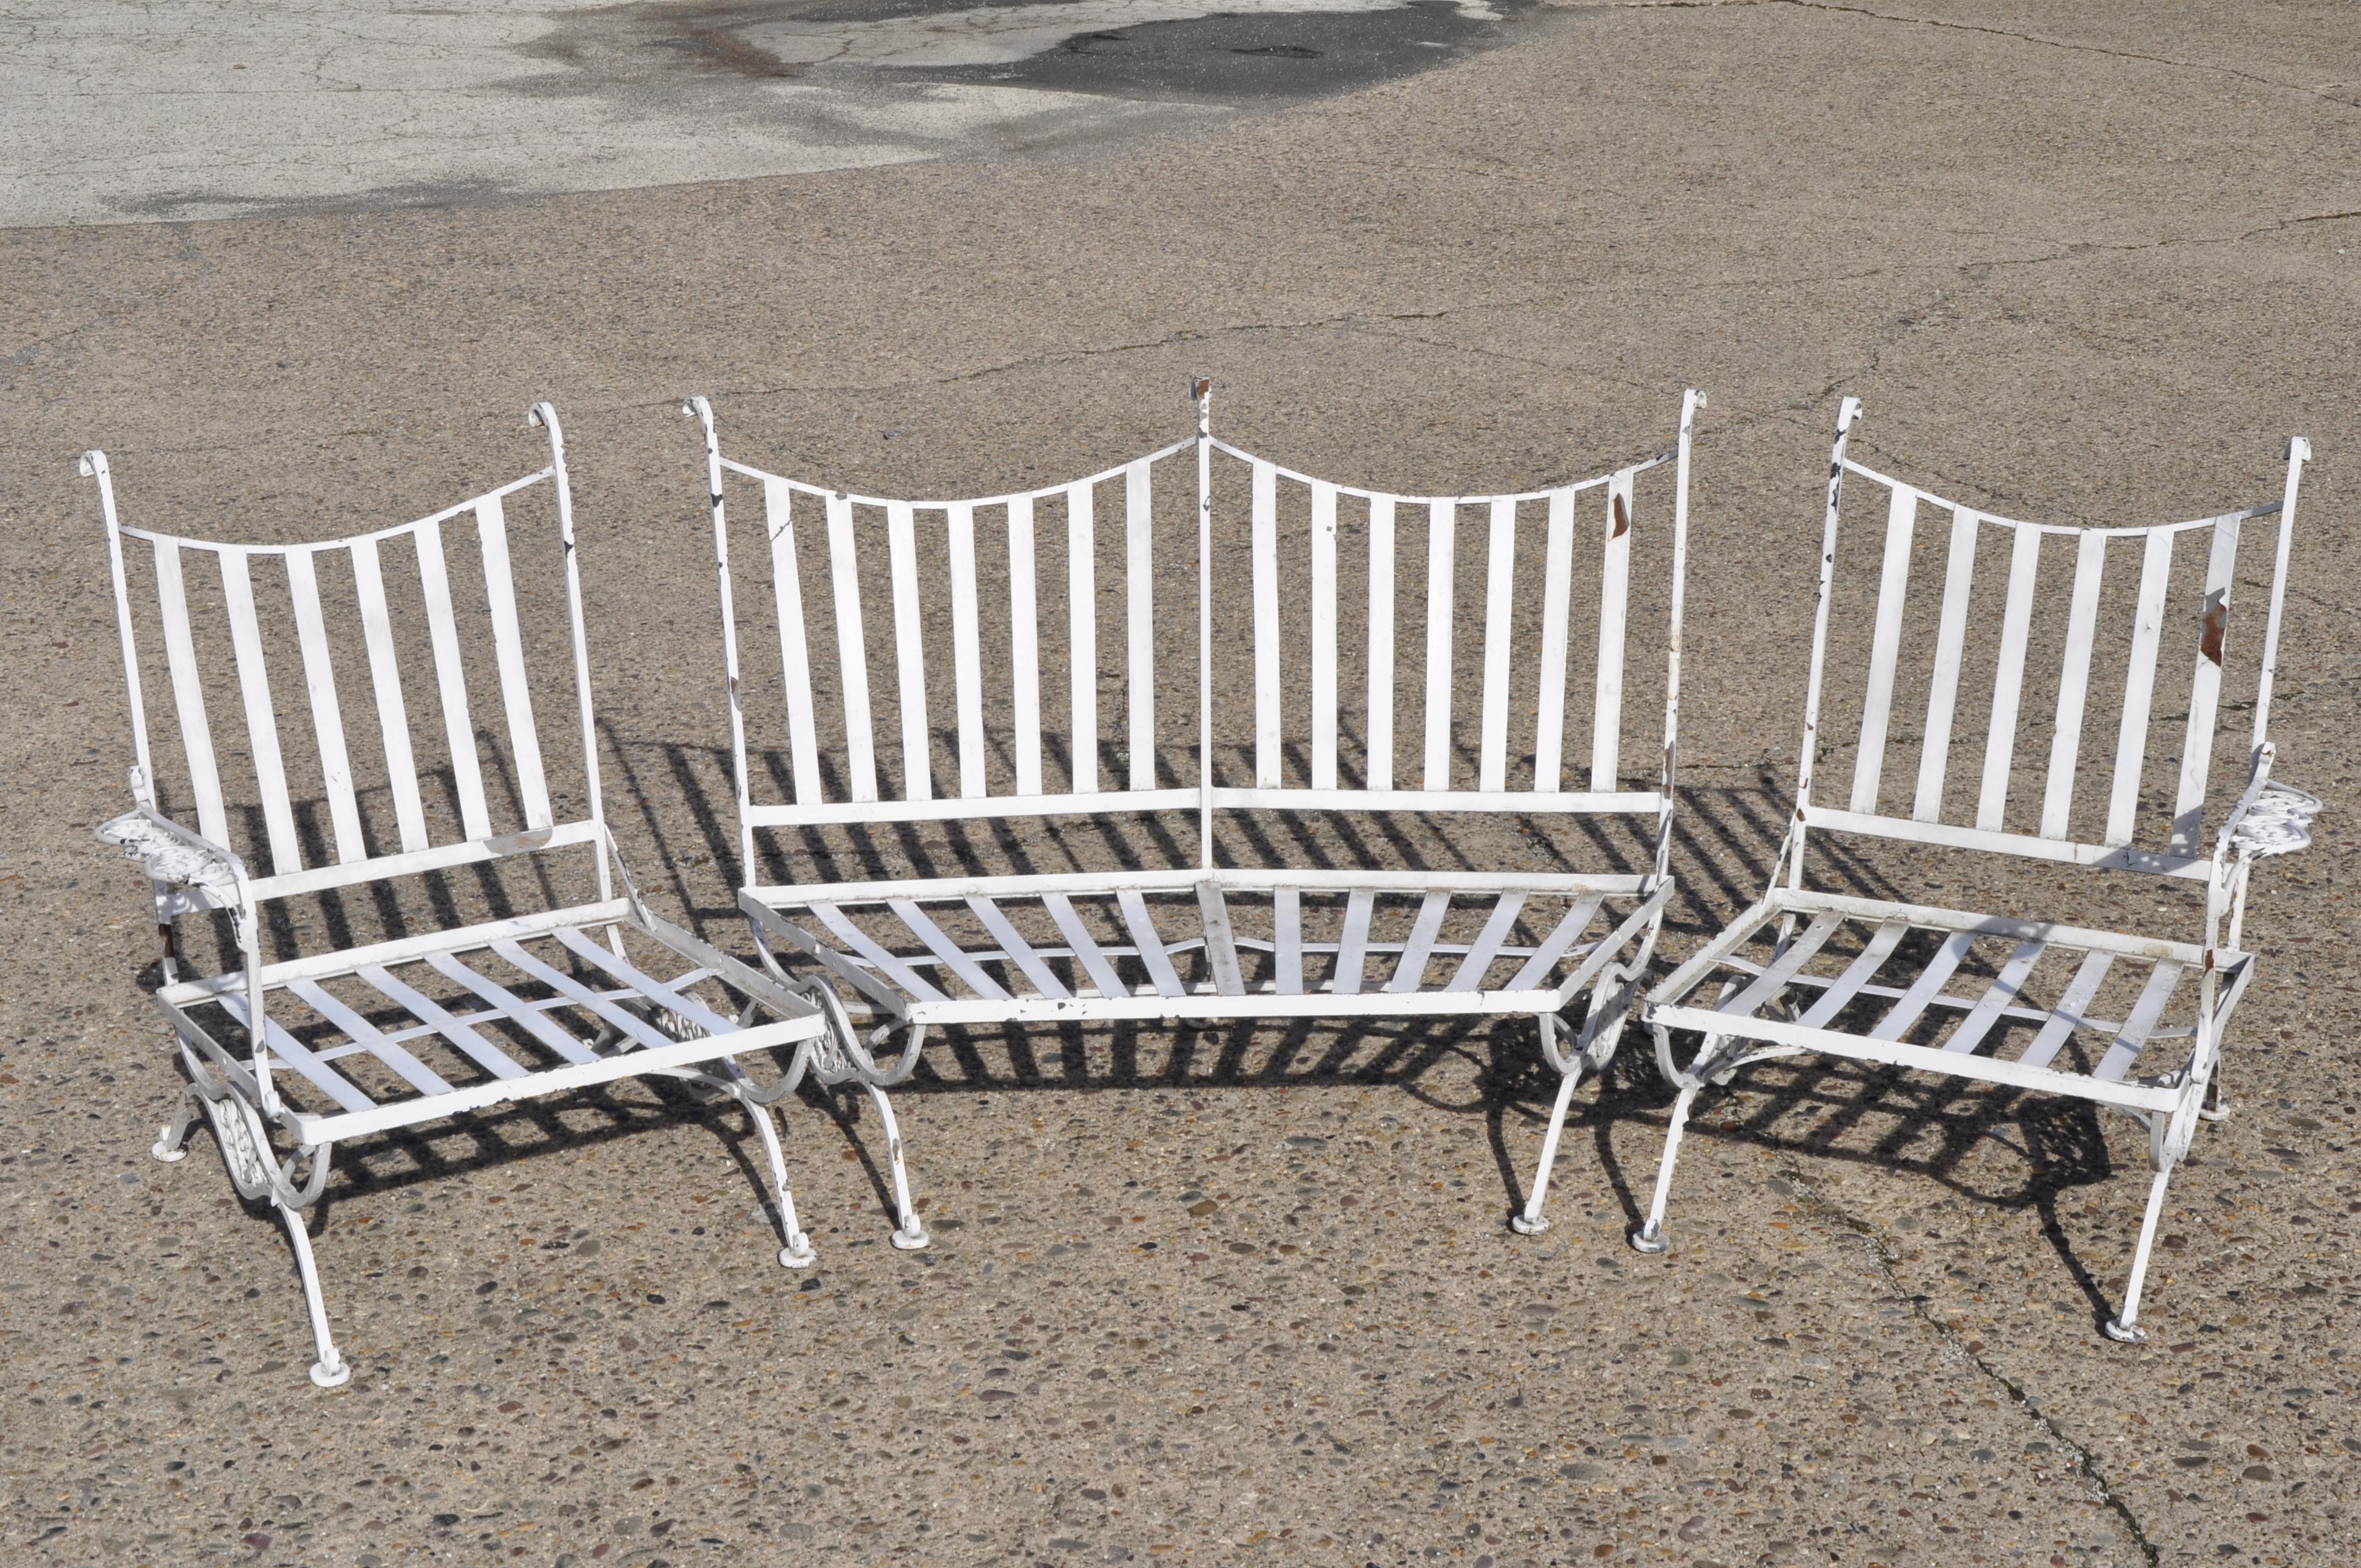 Vintage Woodard Andalusian wrought iron 3-piece curved sunroom garden patio sofa. Listing includes custom cushions, fancy scrollwork, wrought iron frame, 3 part construction, quality American craftsmanship, great style and form, circa mid-20th